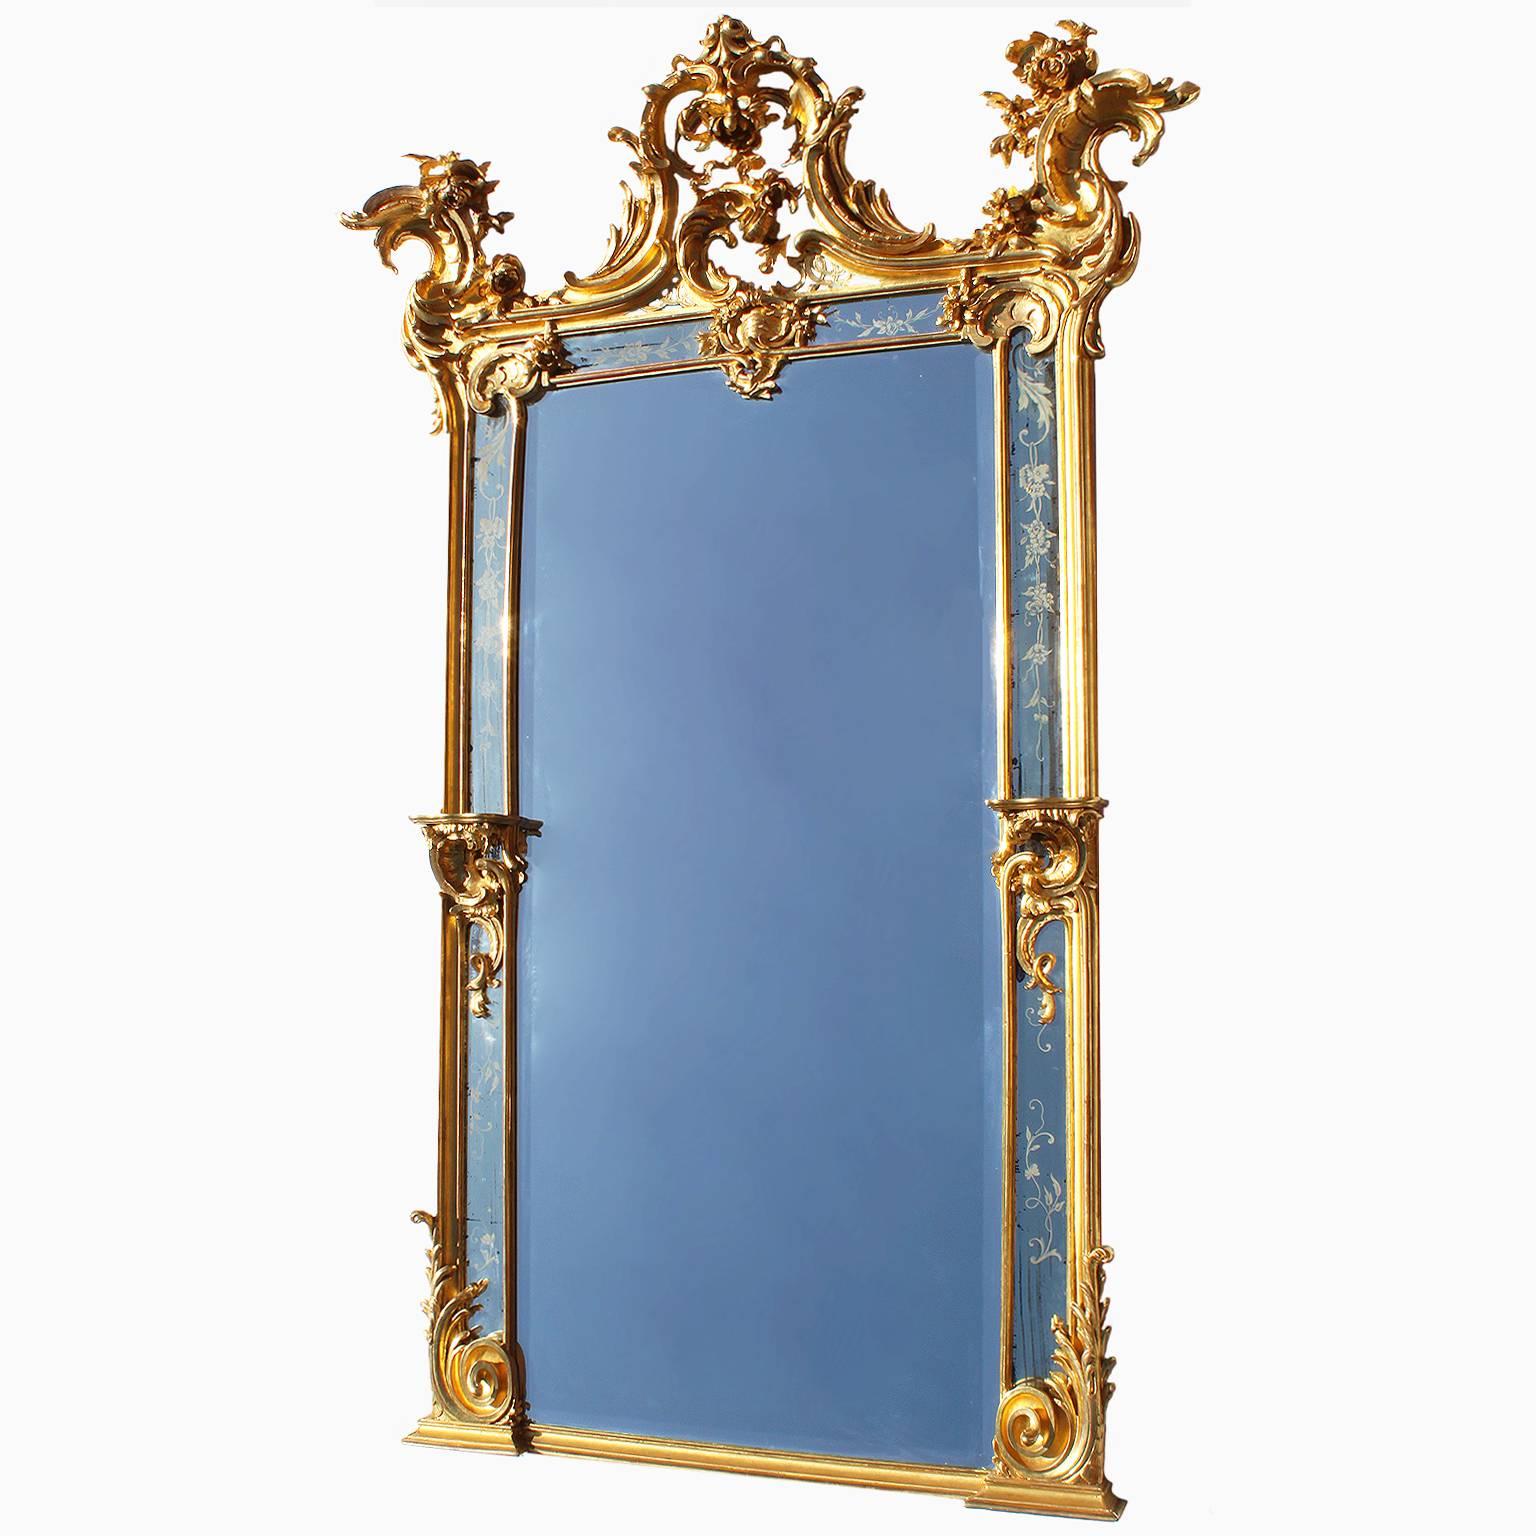 A very fine and important pair of French 19th century Rococo Revival style giltwood carved pier mirrors. The elongated intricately carved frames with carvings of tropical flowers, scrolls, seashells and acanthus, flanked on each side by a pair of